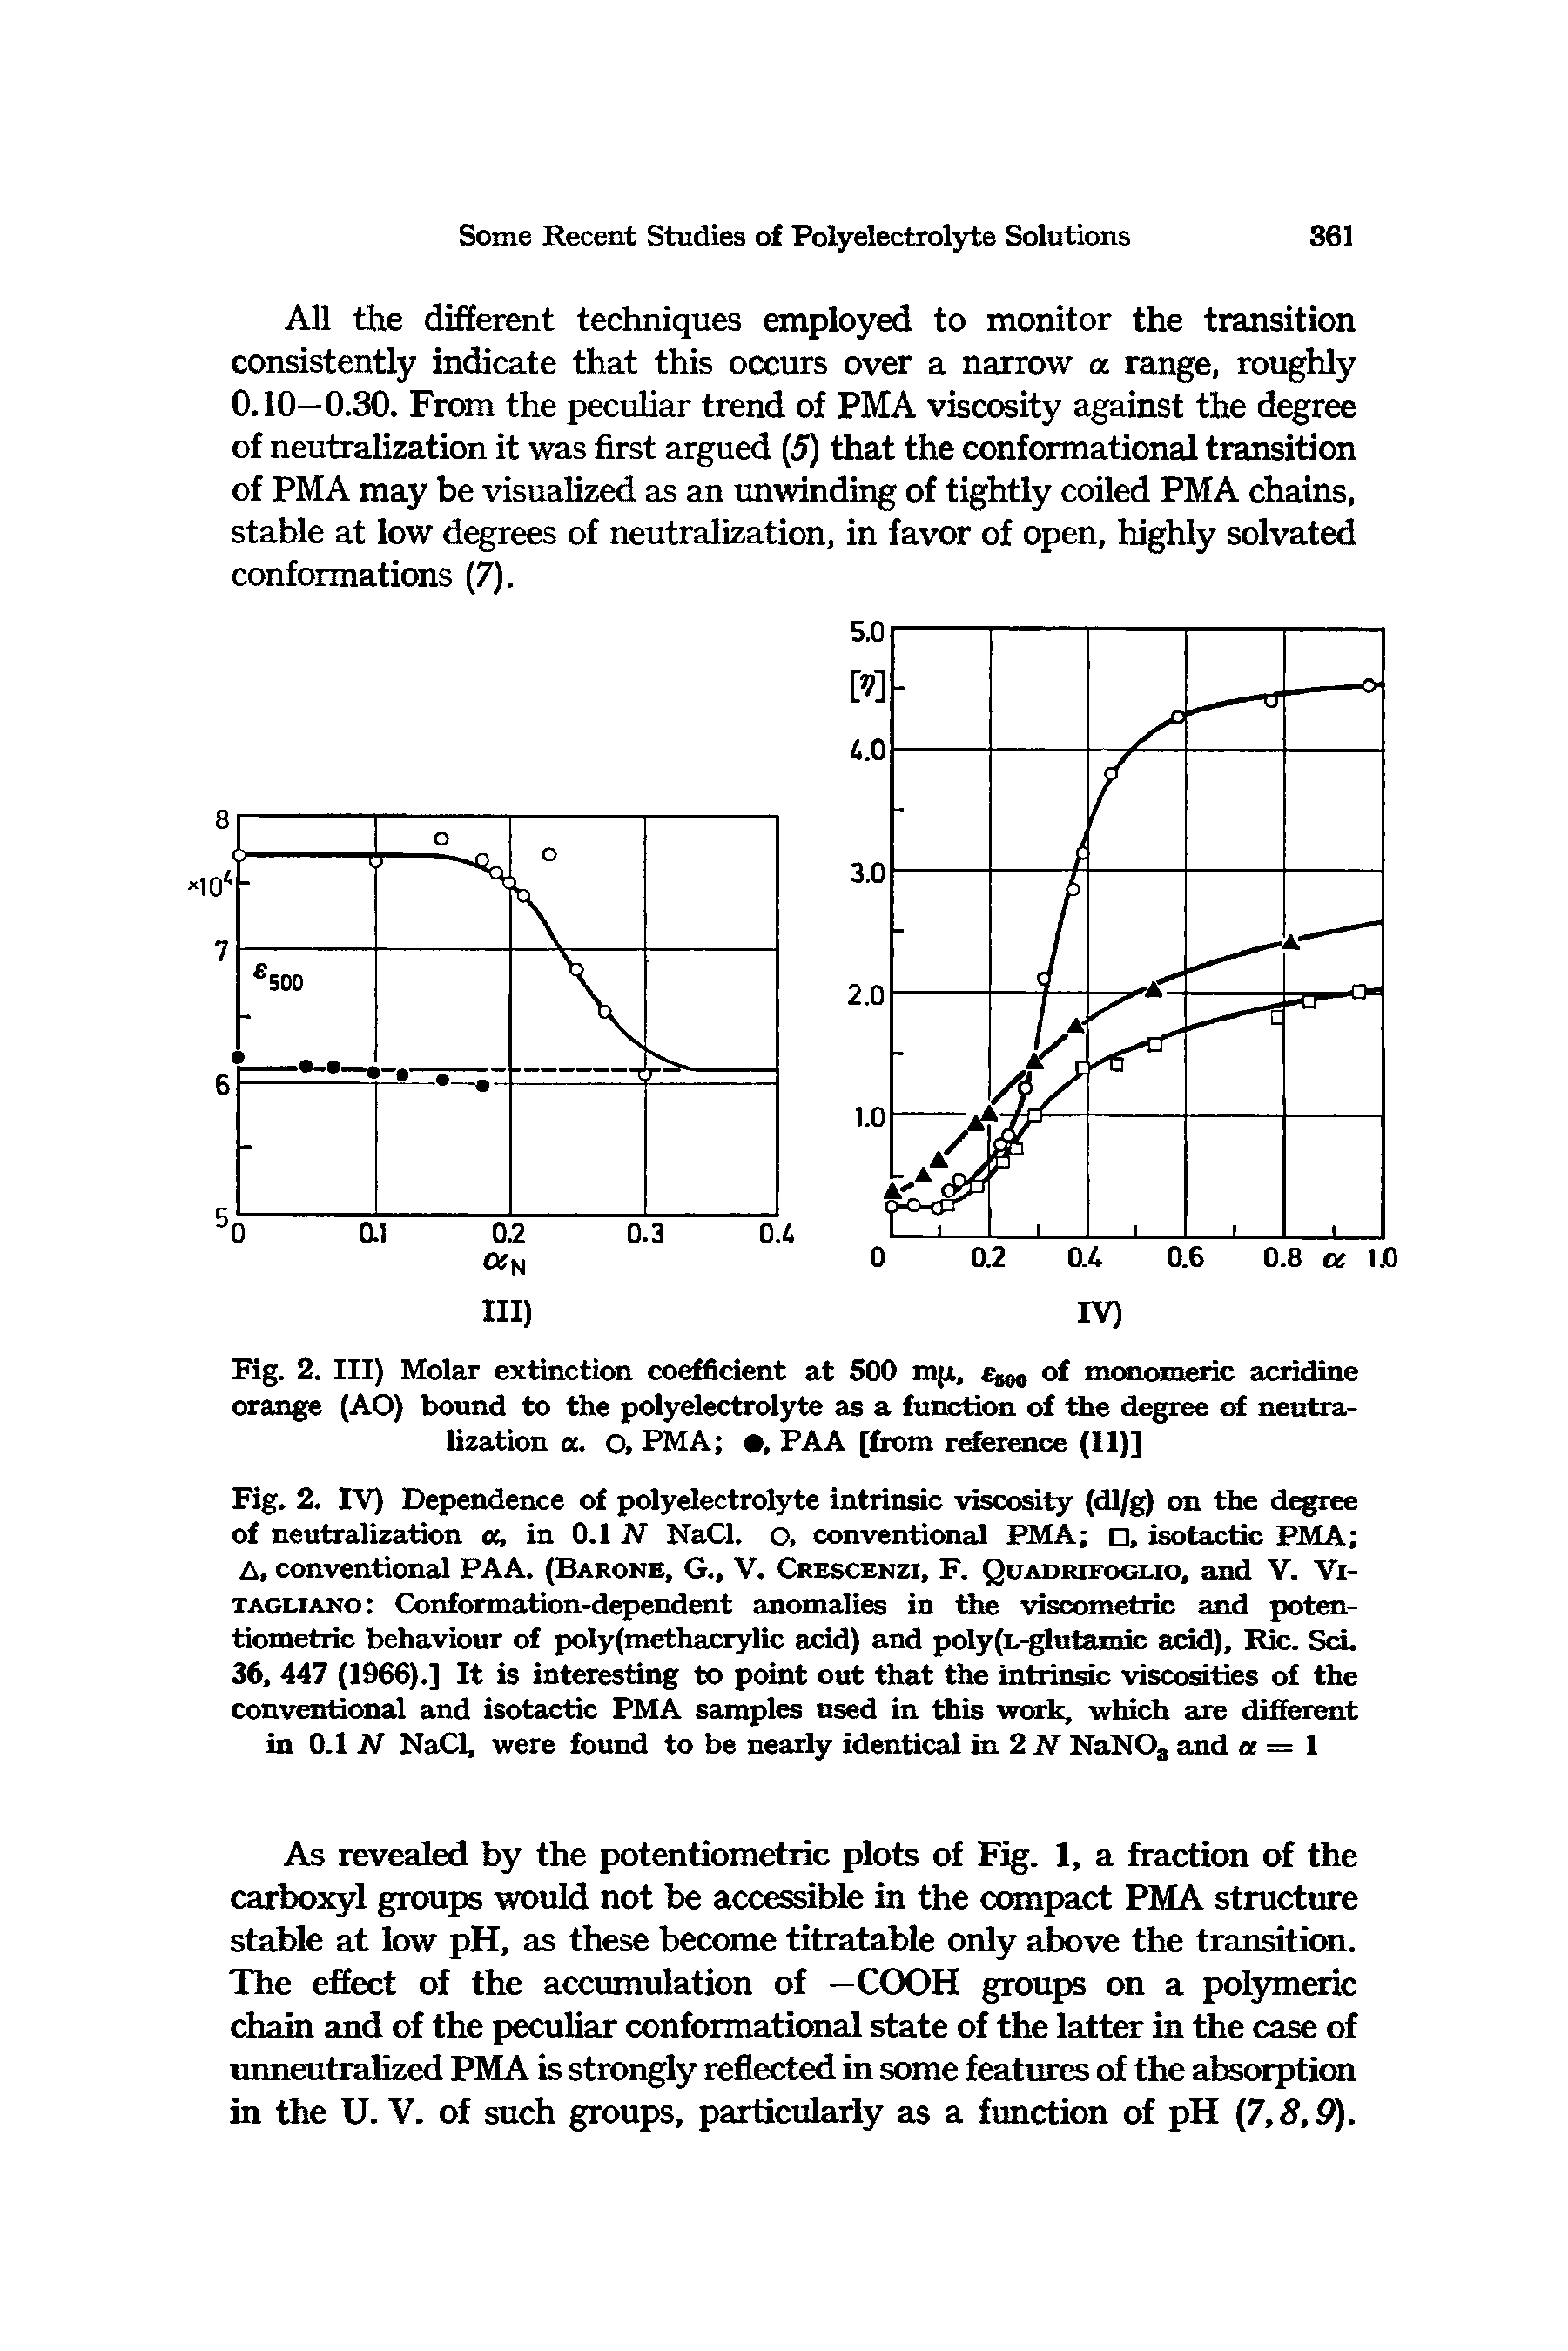 Fig. 2. Ill) Molar extinction coefficient at 500 mjr, of monomeric acridine orange (AO) bound to the polyelectrolyte as a function of the degree of neutralization a. O, PMA , PAA [from reference (II)]...